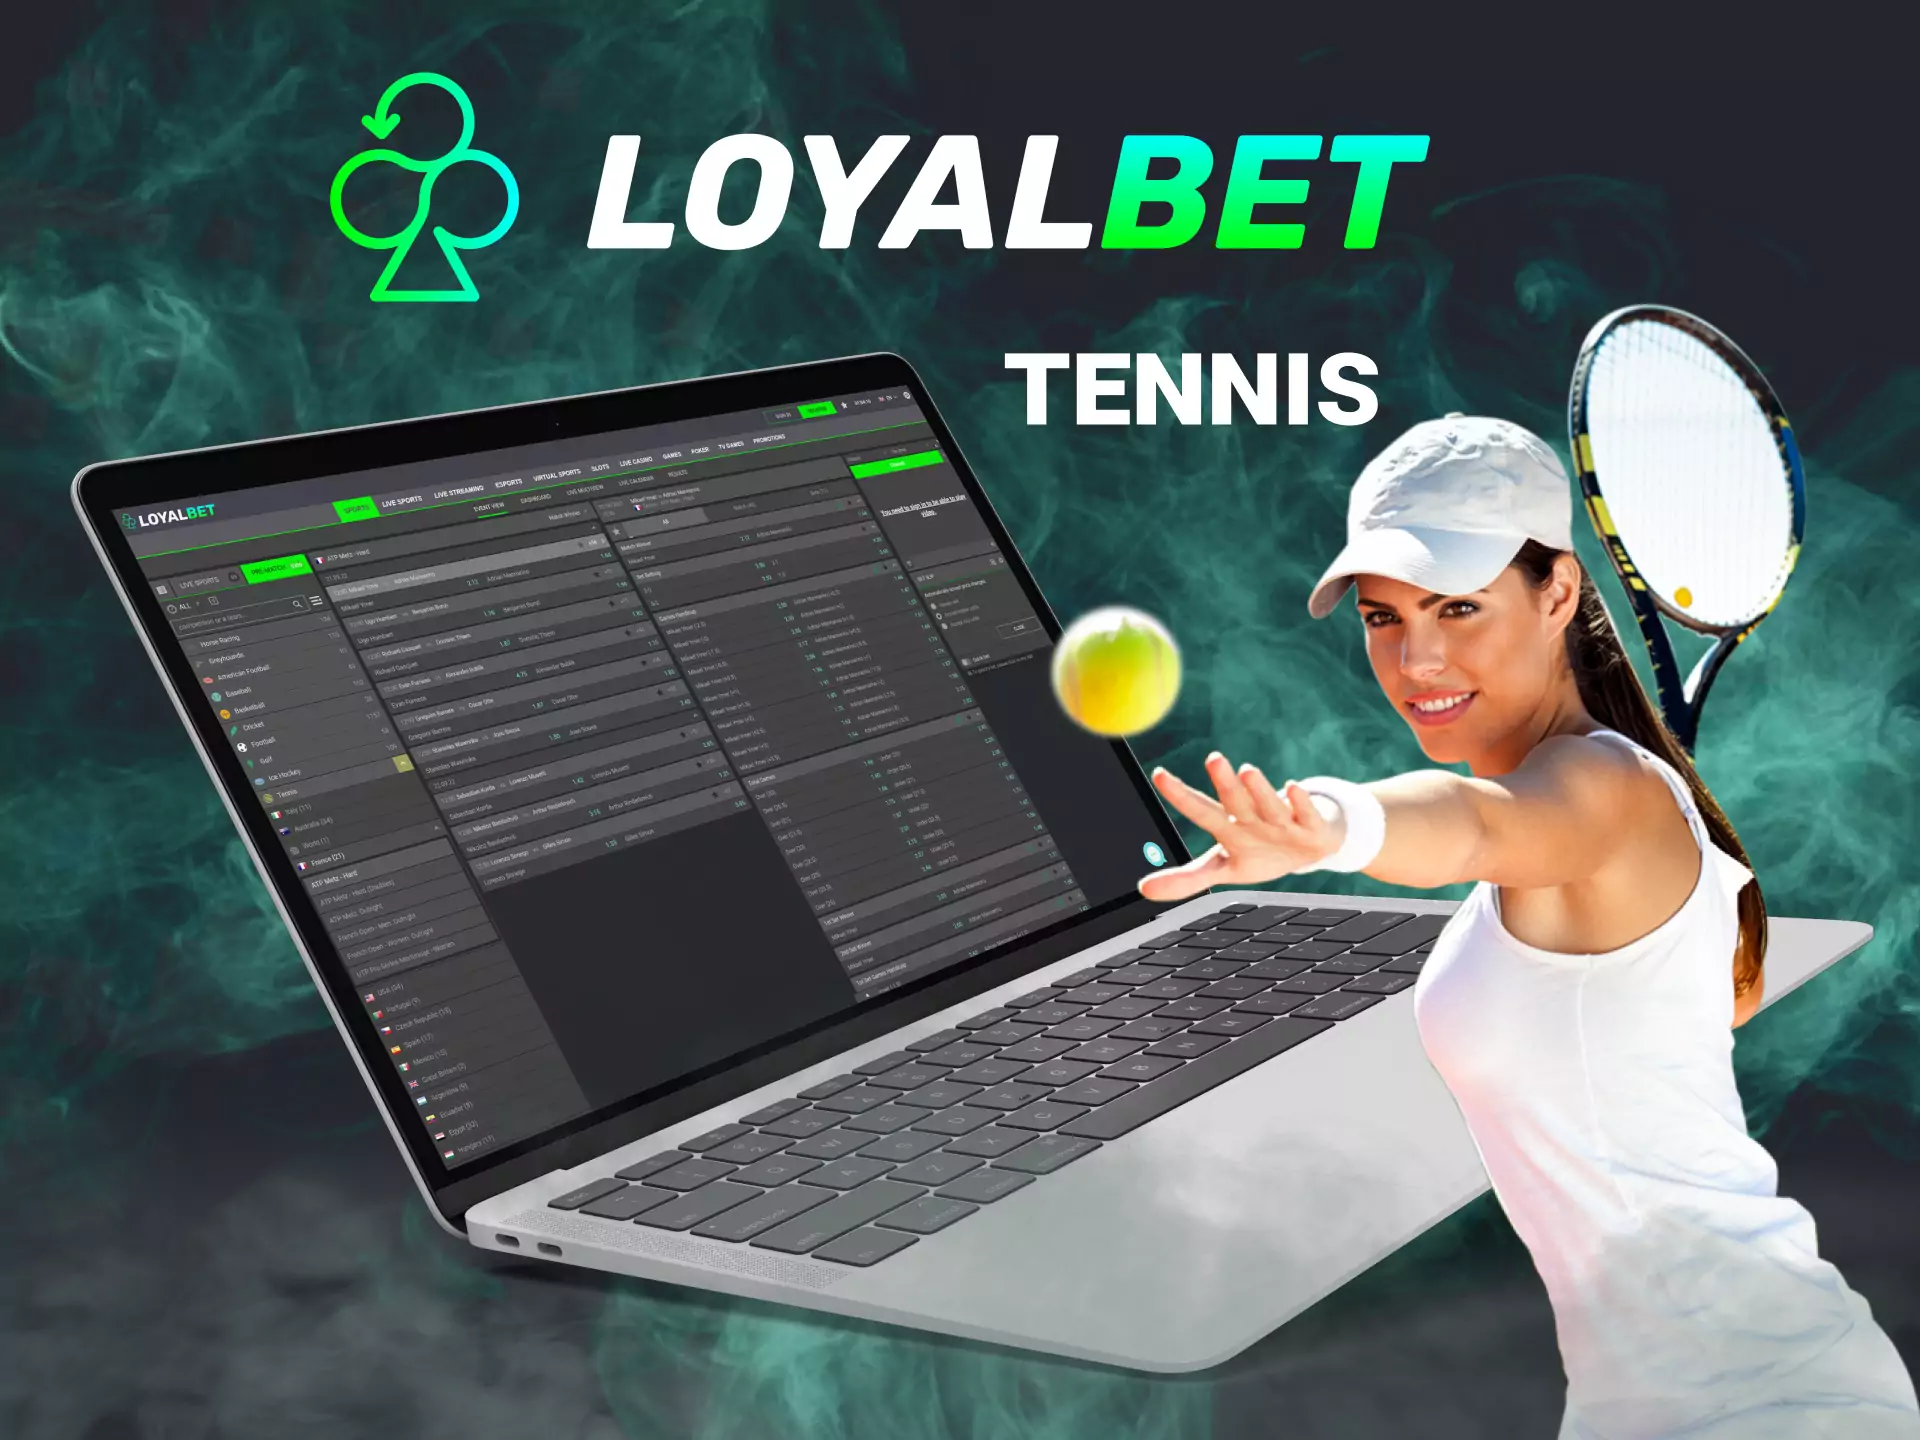 Tennis events have lots of fans among users of the Loyalbet website.